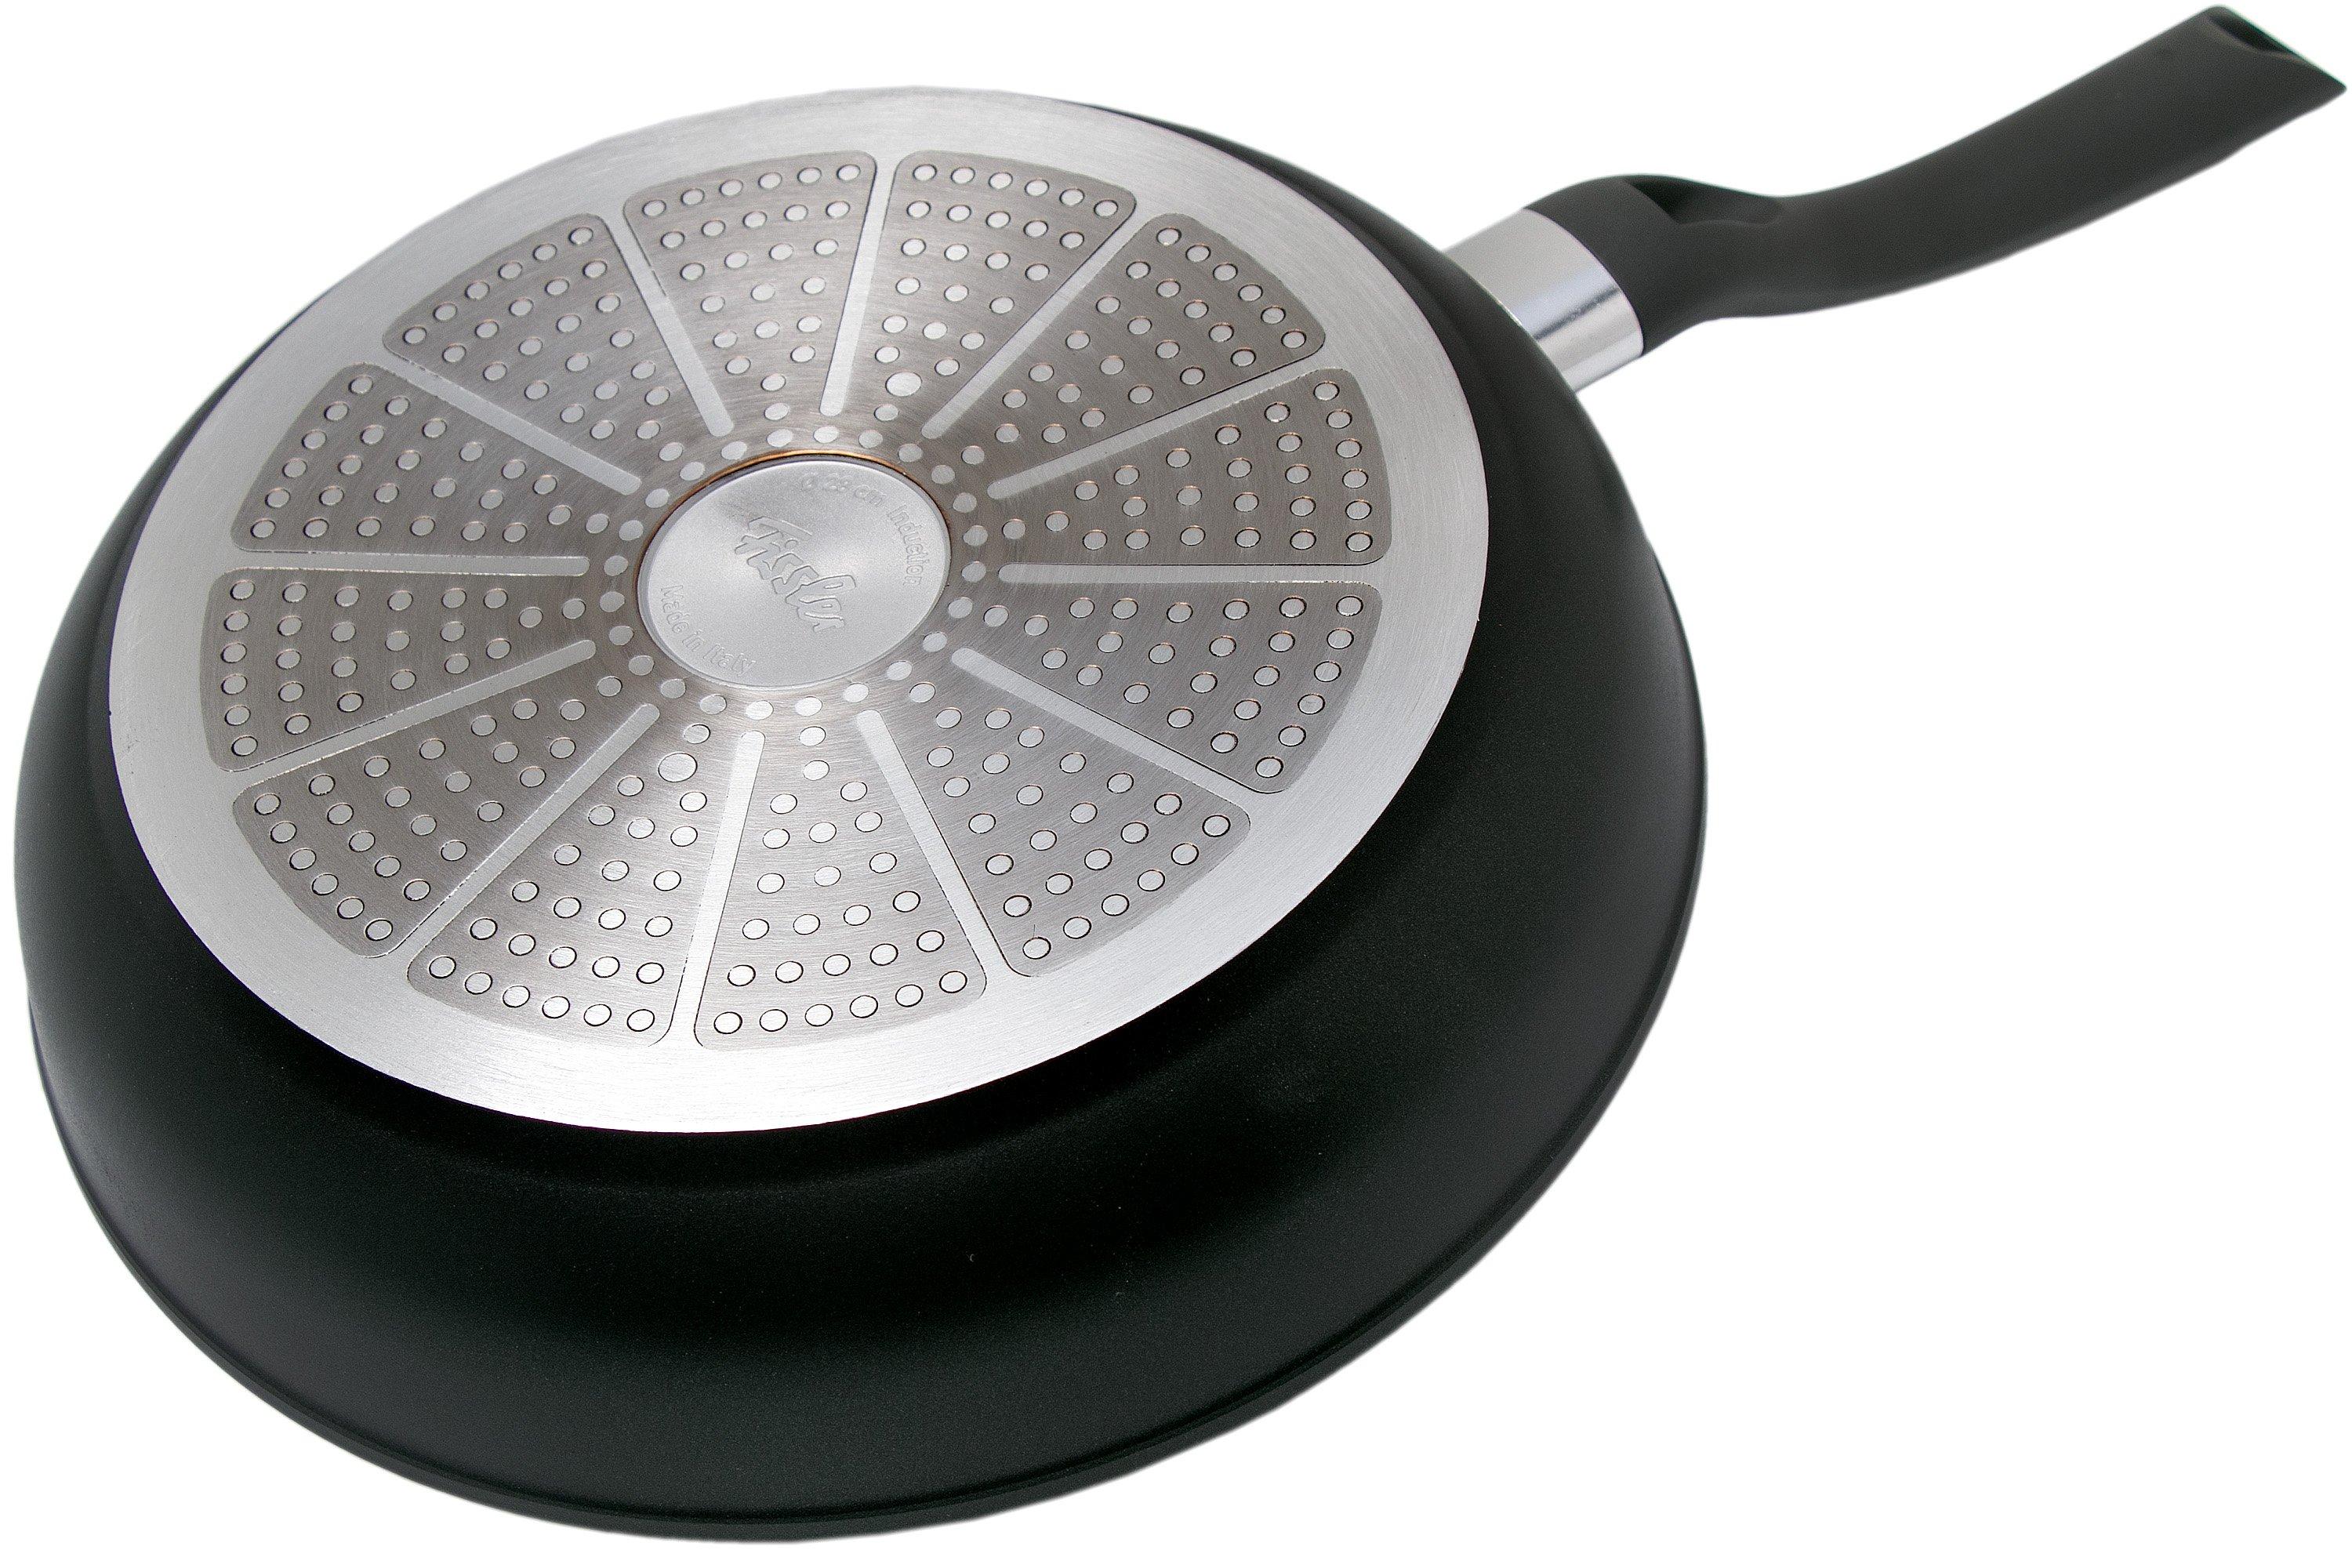 pan at | frying Advantageously 28 045-301-28-100, cm Cenit Fissler shopping Induction